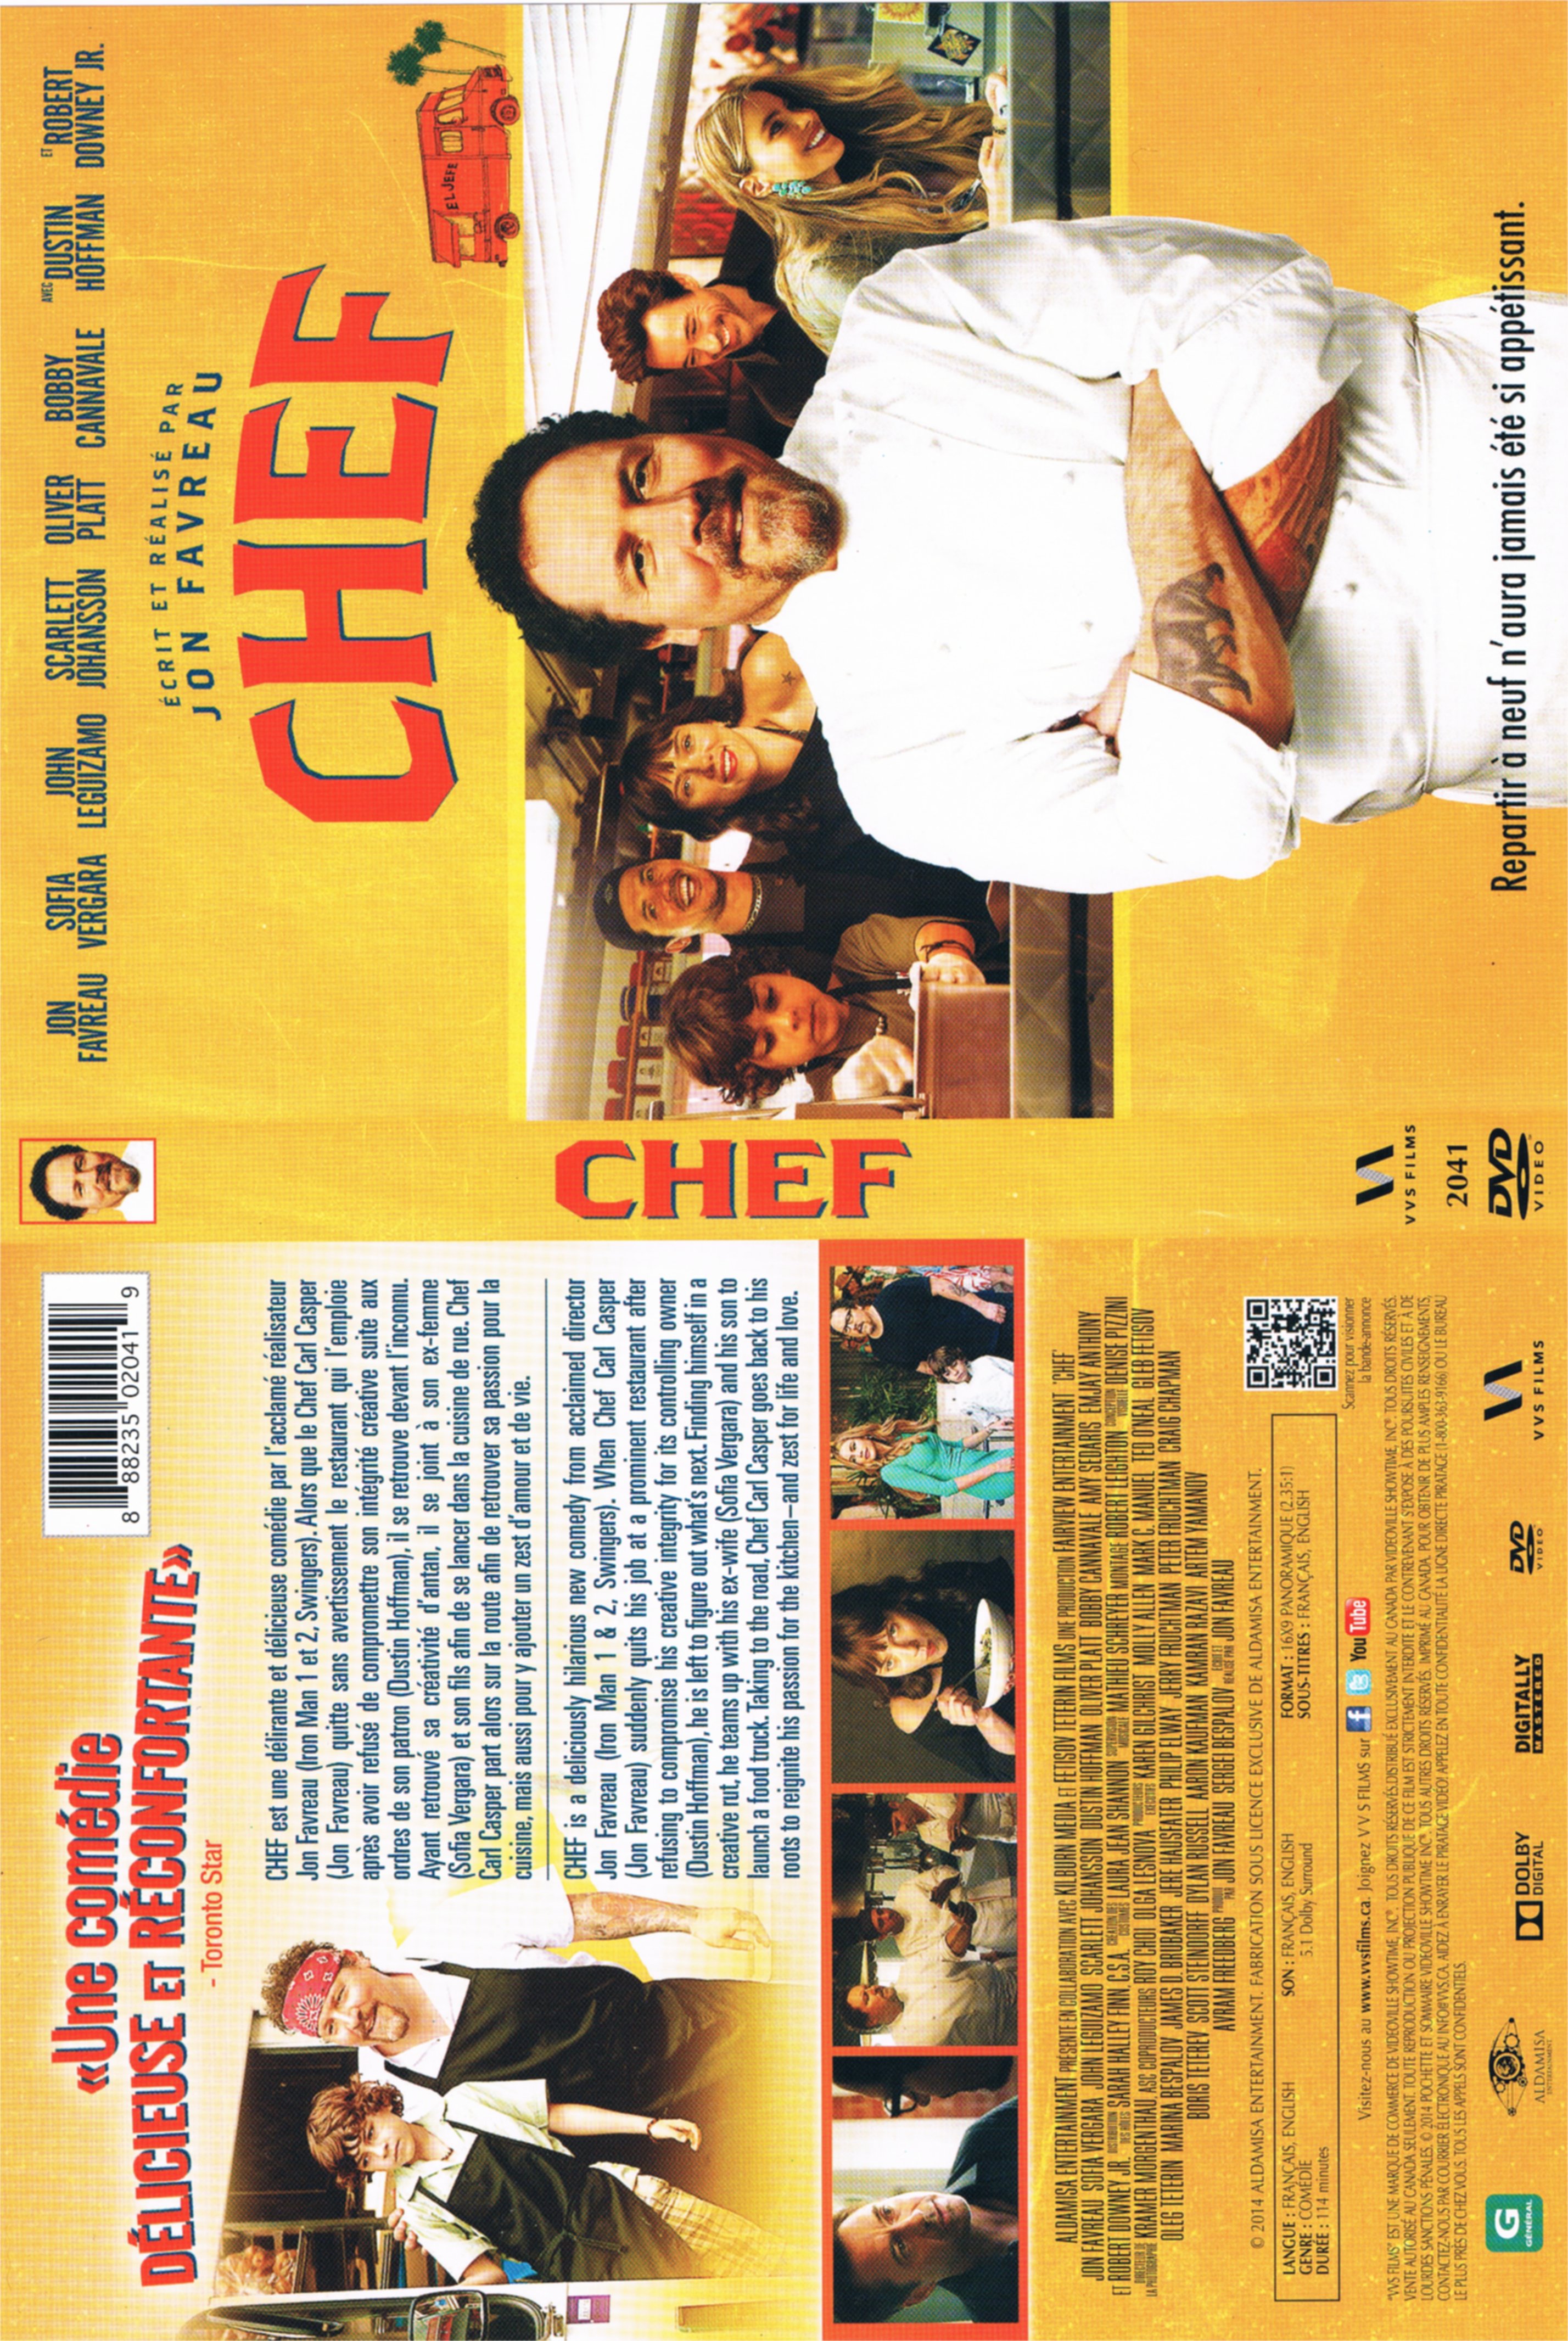 Jaquette DVD Chef (Canadienne)